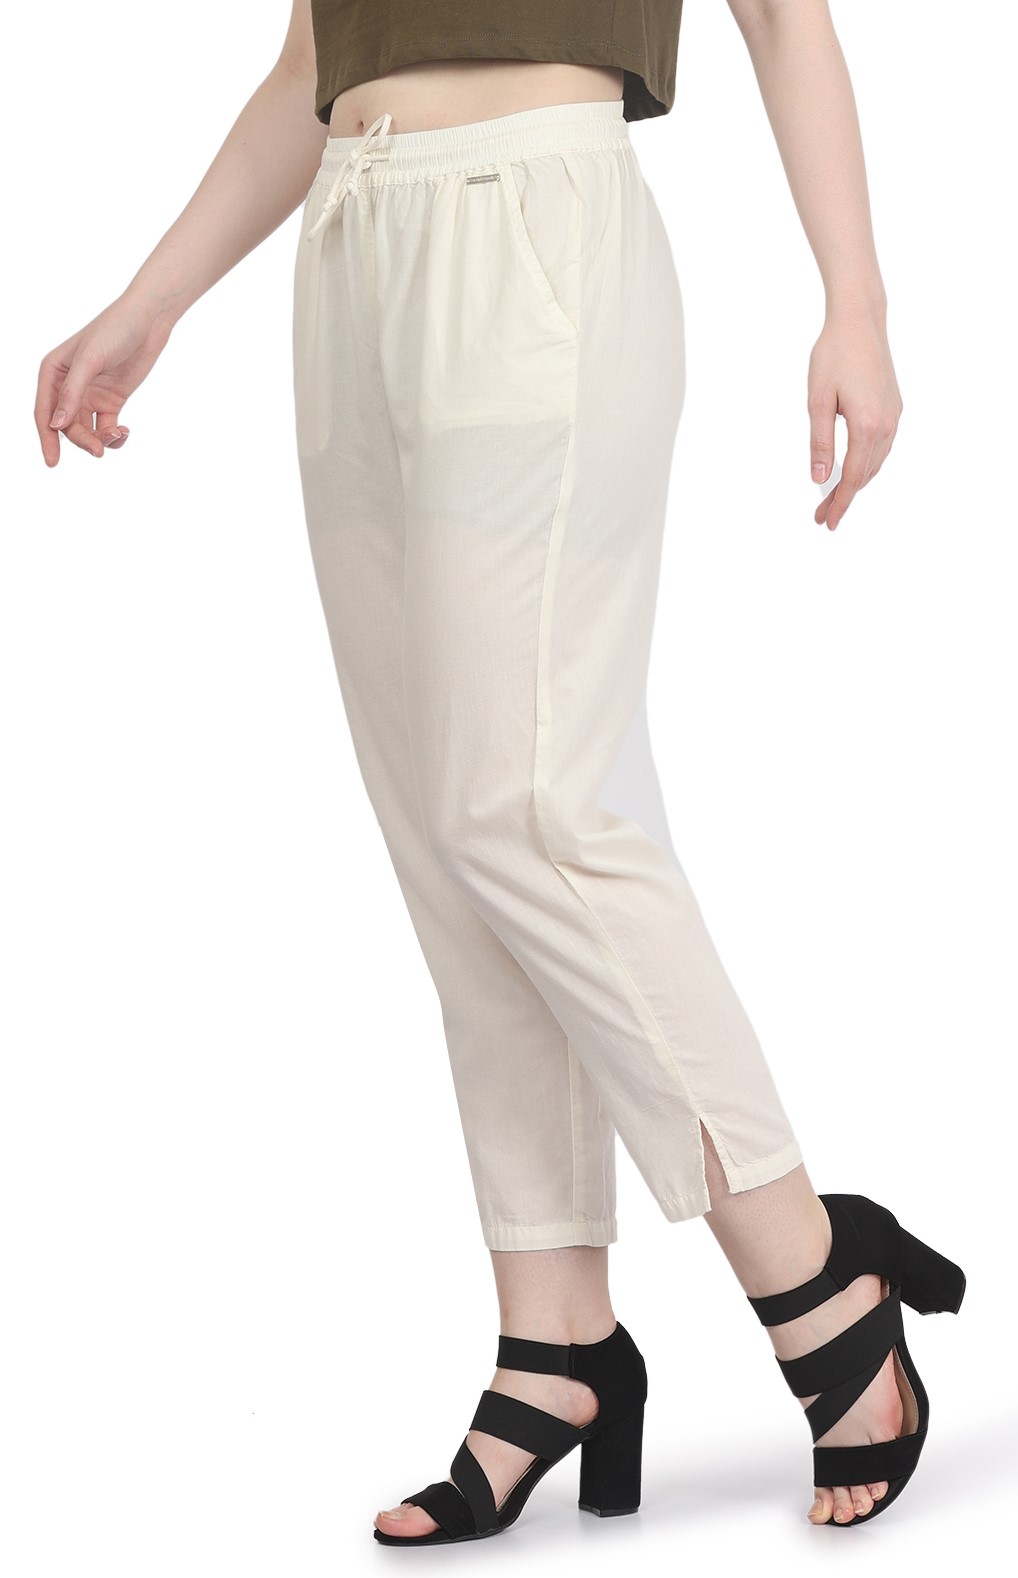 Frenchtrendz  Frenchtrendz Women's cotton pant Elastic closure with  drawstring